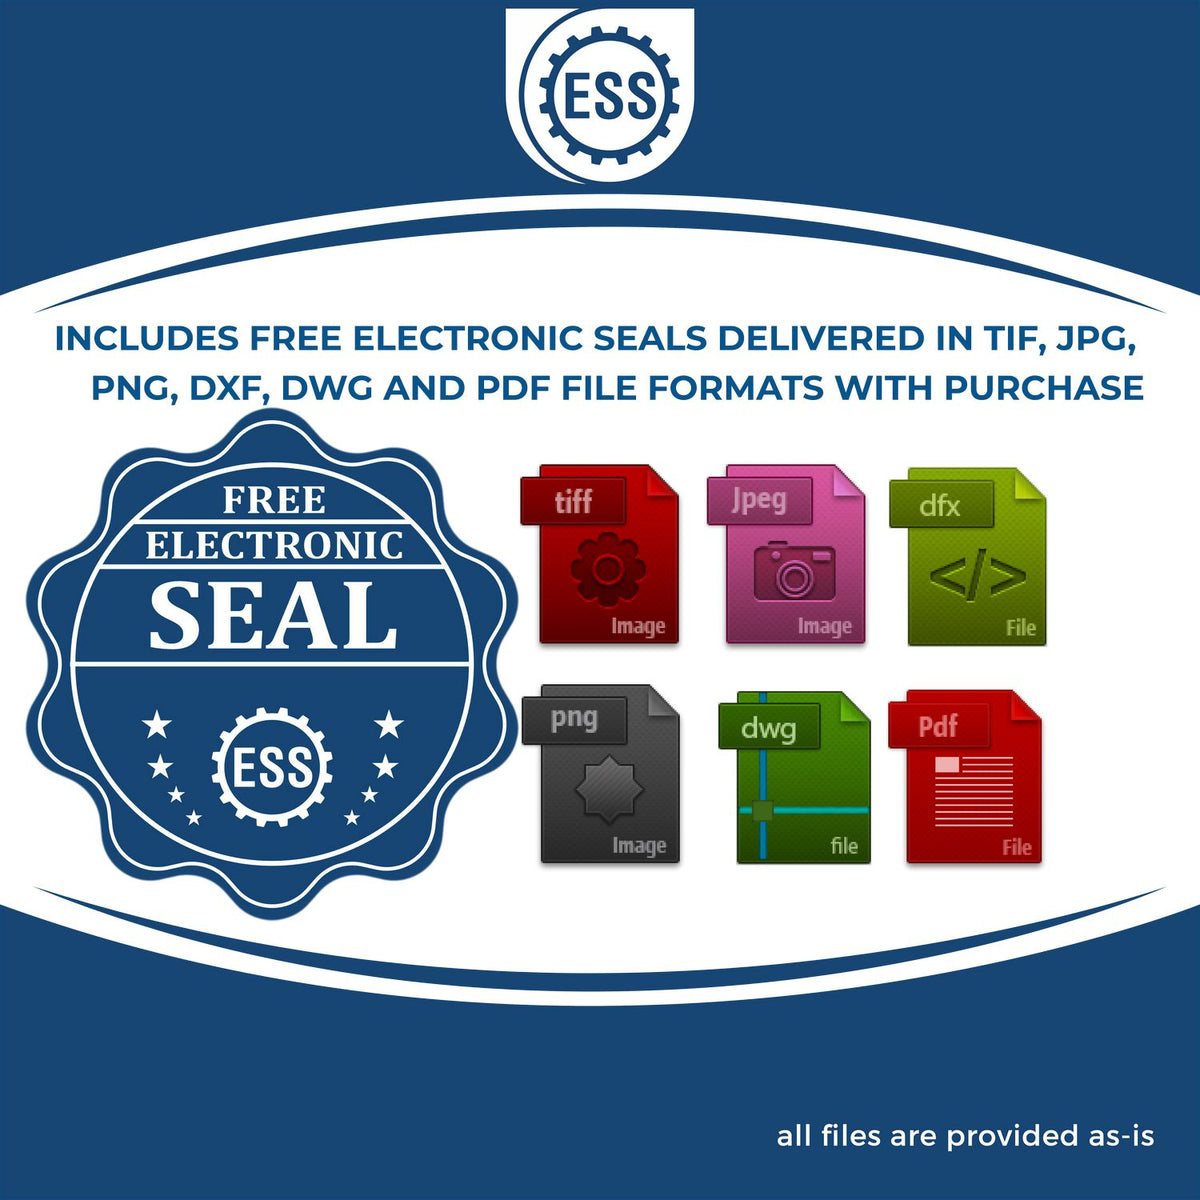 An infographic for the free electronic seal for the Self-Inking State Seal Utah Notary Stamp illustrating the different file type icons such as DXF, DWG, TIF, JPG and PNG.